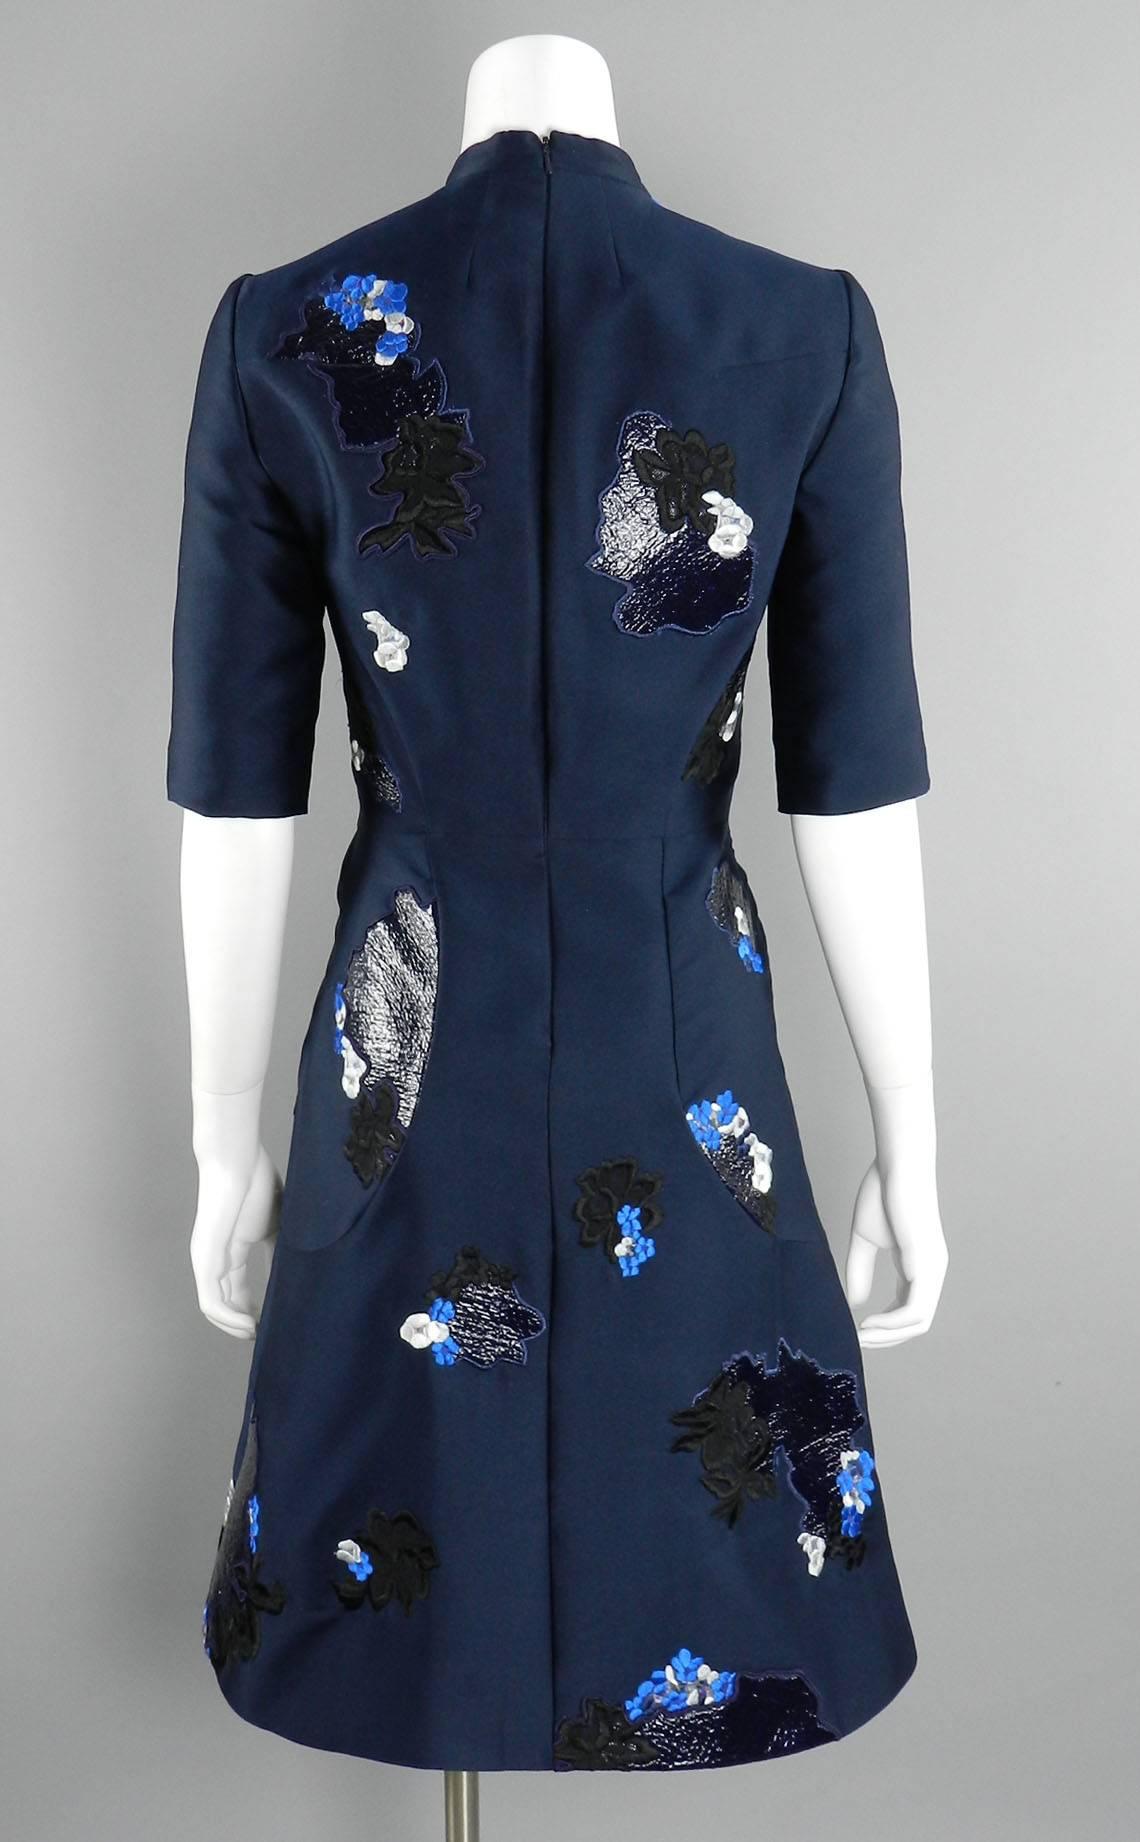 Erdem fall 2012 Runway Navy Lace Embroidered Dress 2